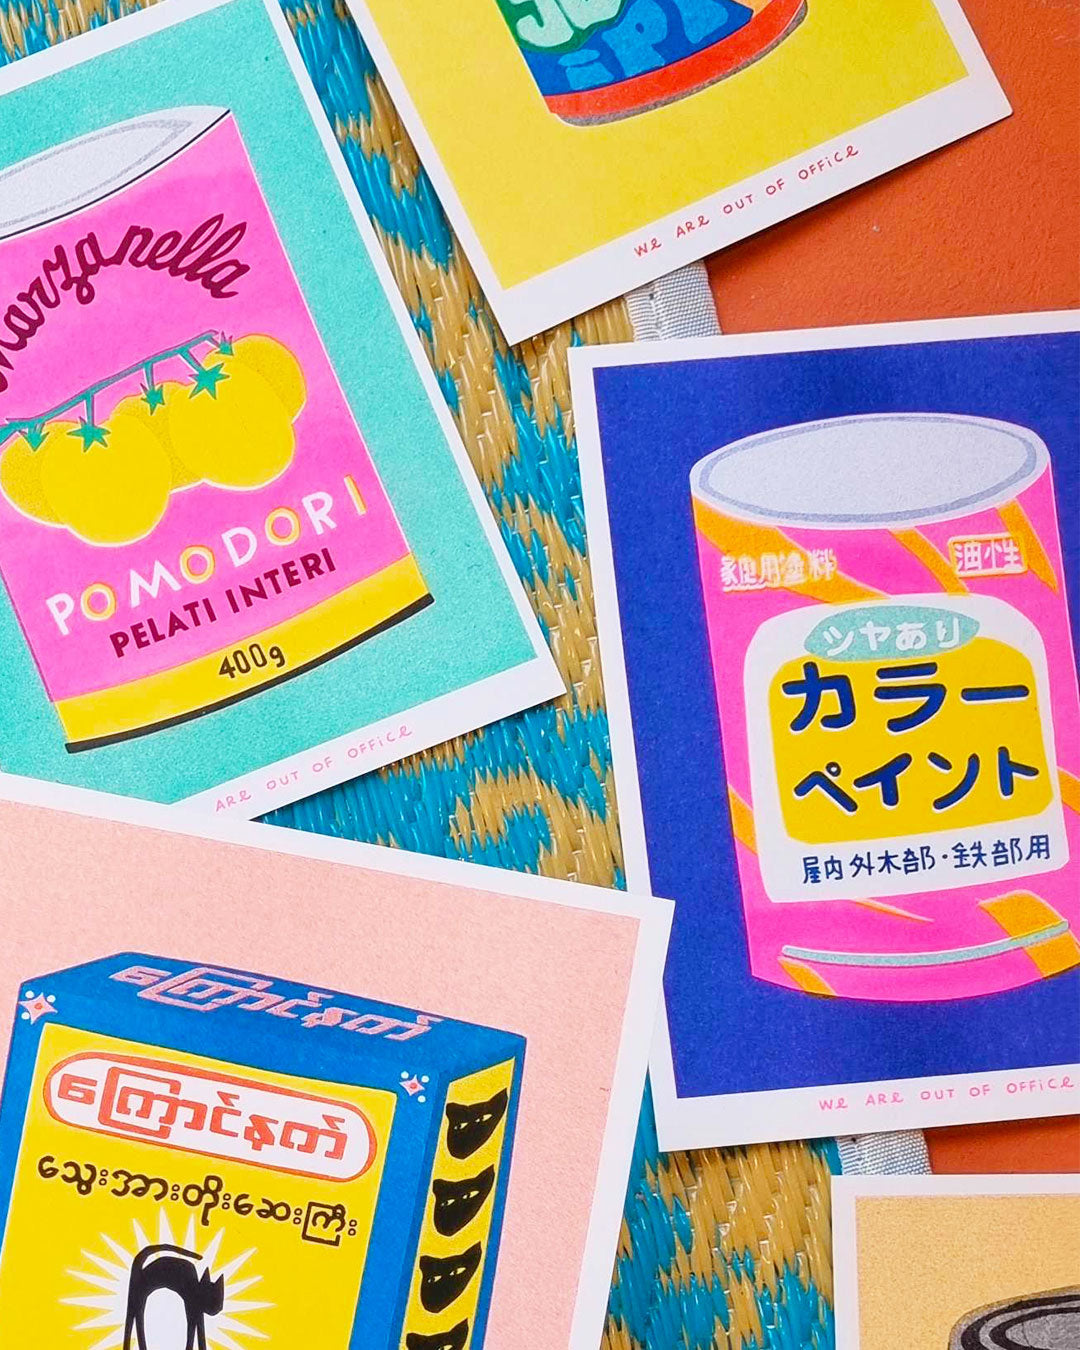 A Risograph Print of a Japanese Bucket of Paint